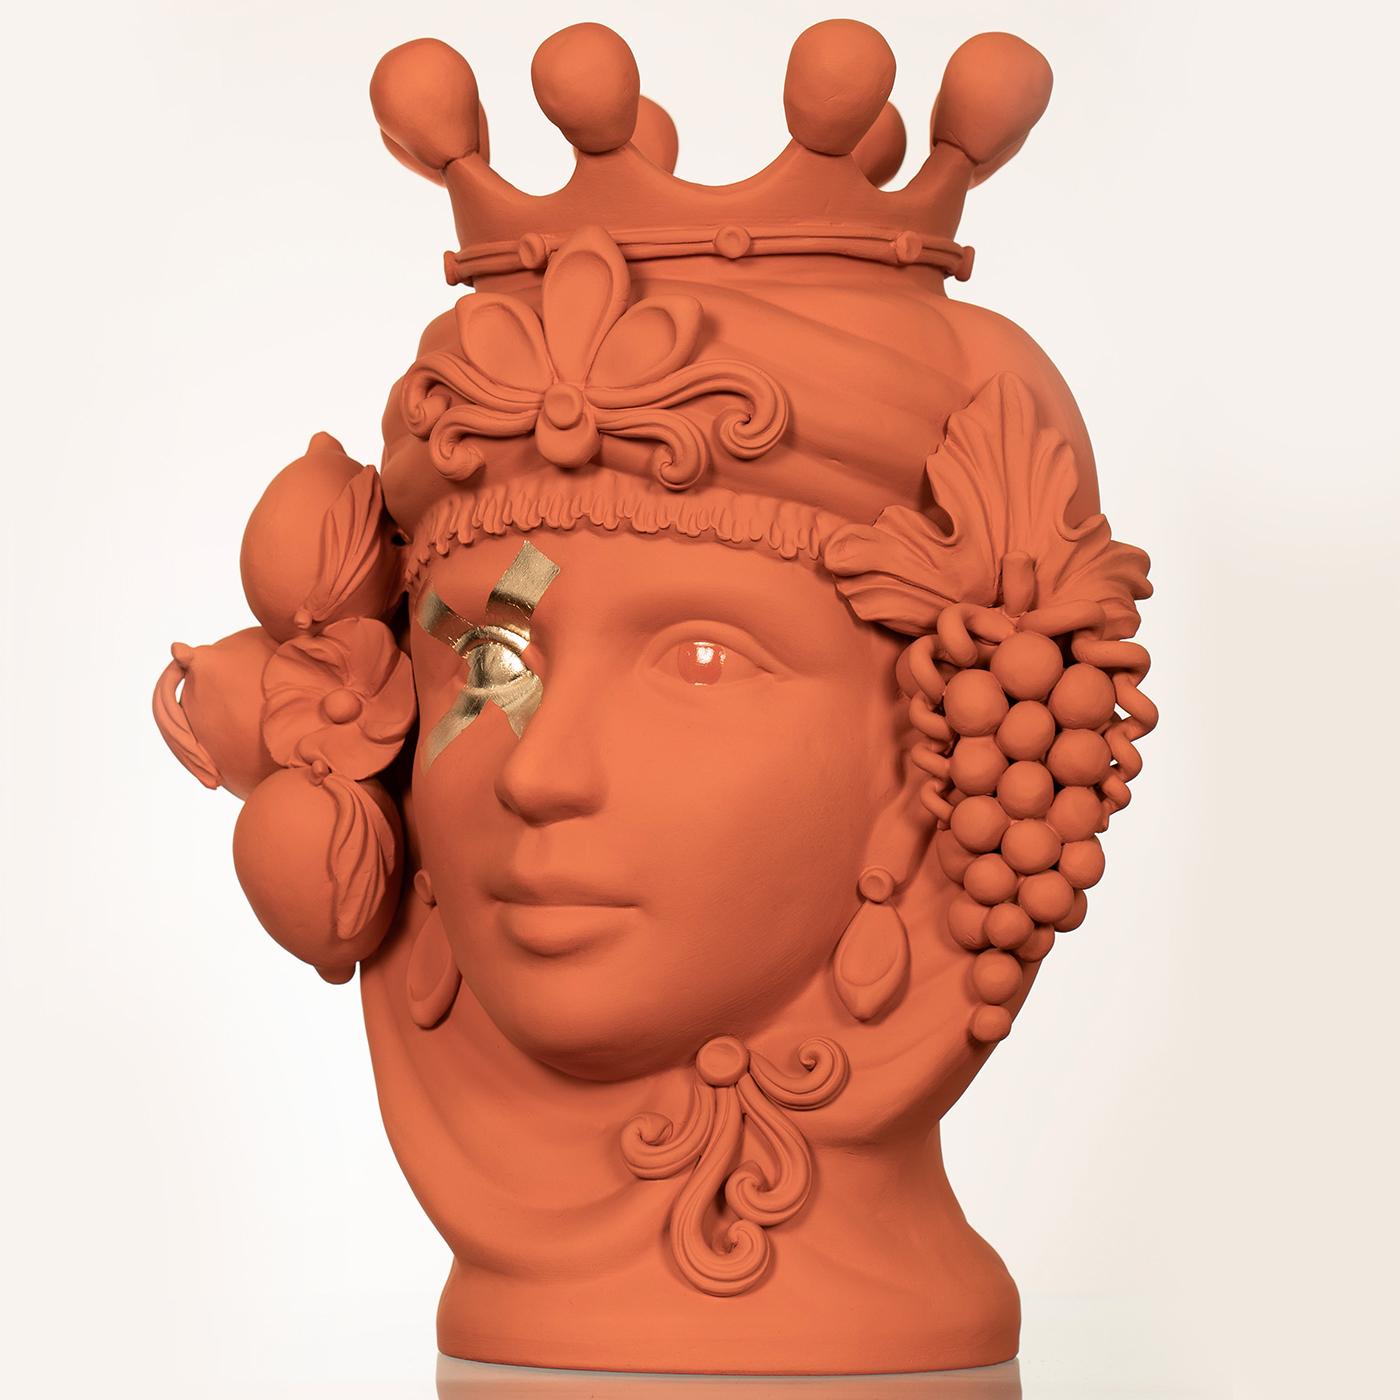 This unique work of art is sure to make a statement in an eclectic or modern decor, where it will be an ideal vessel to display floral compositions or as a statement sculpture. Its design is inspired by the Moorish-inspired sculptures in Sicilian